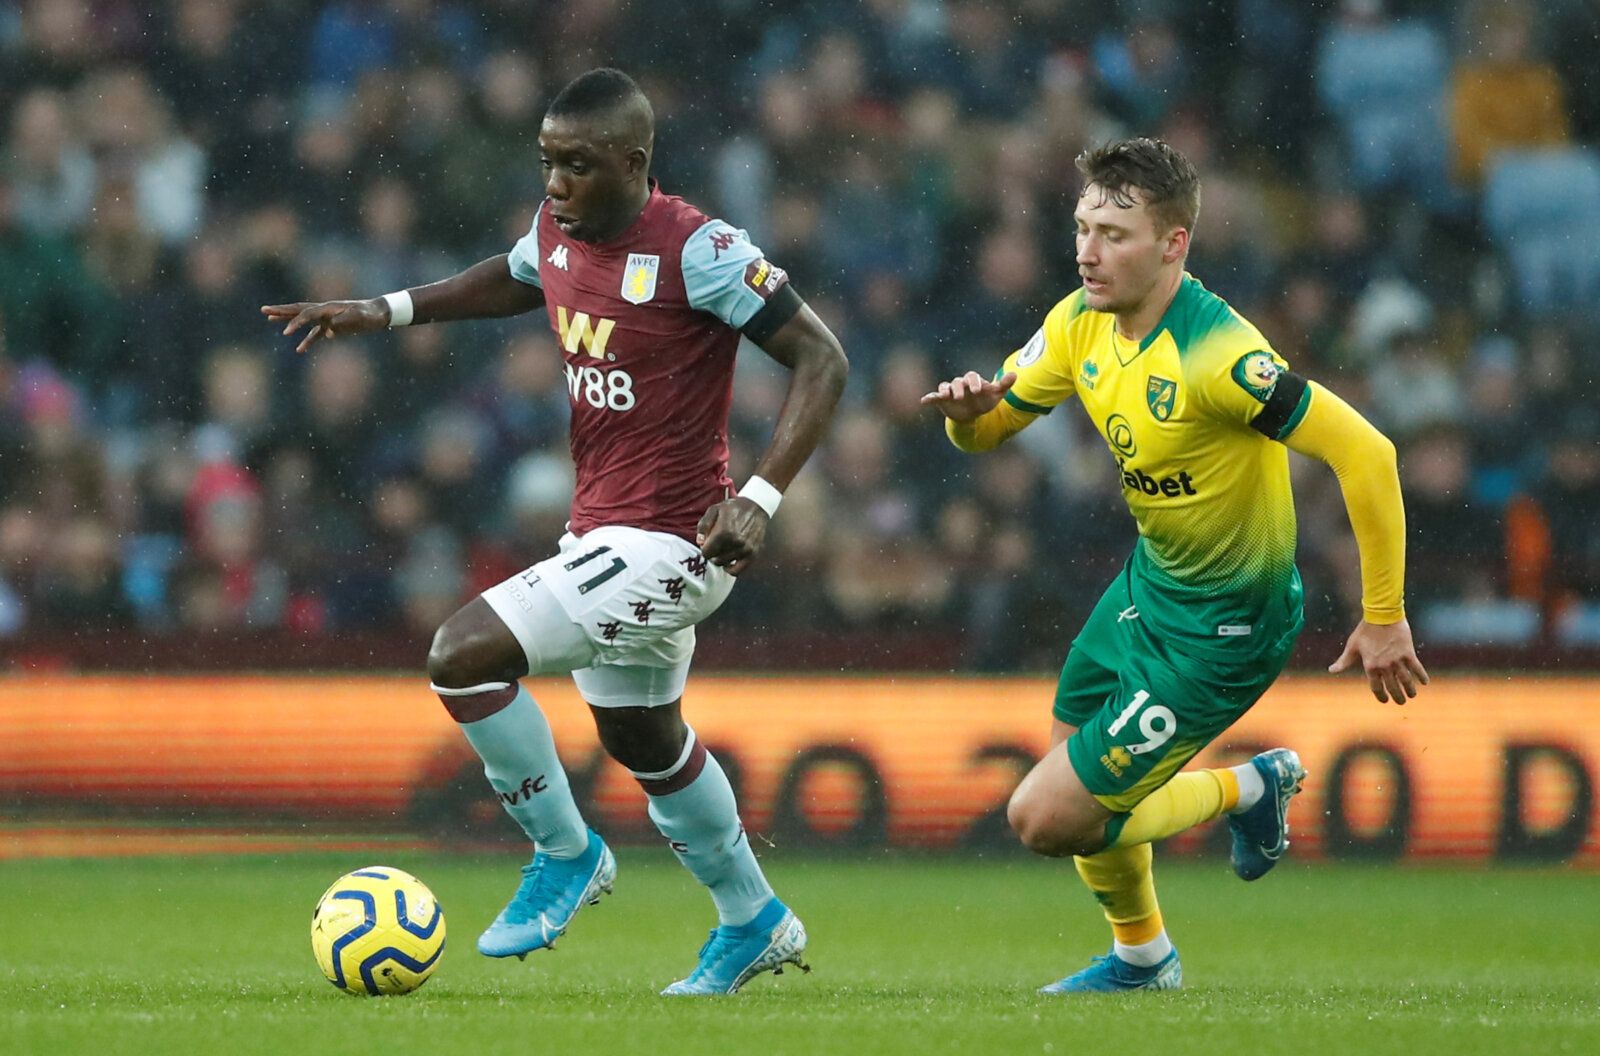 Soccer Football - Premier League - Aston Villa v Norwich City - Villa Park, Birmingham, Britain - December 26, 2019  Aston Villa's Marvelous Nakamba in action with Norwich City's Tom Trybull  Action Images via Reuters/Andrew Boyers  EDITORIAL USE ONLY. No use with unauthorized audio, video, data, fixture lists, club/league logos or 